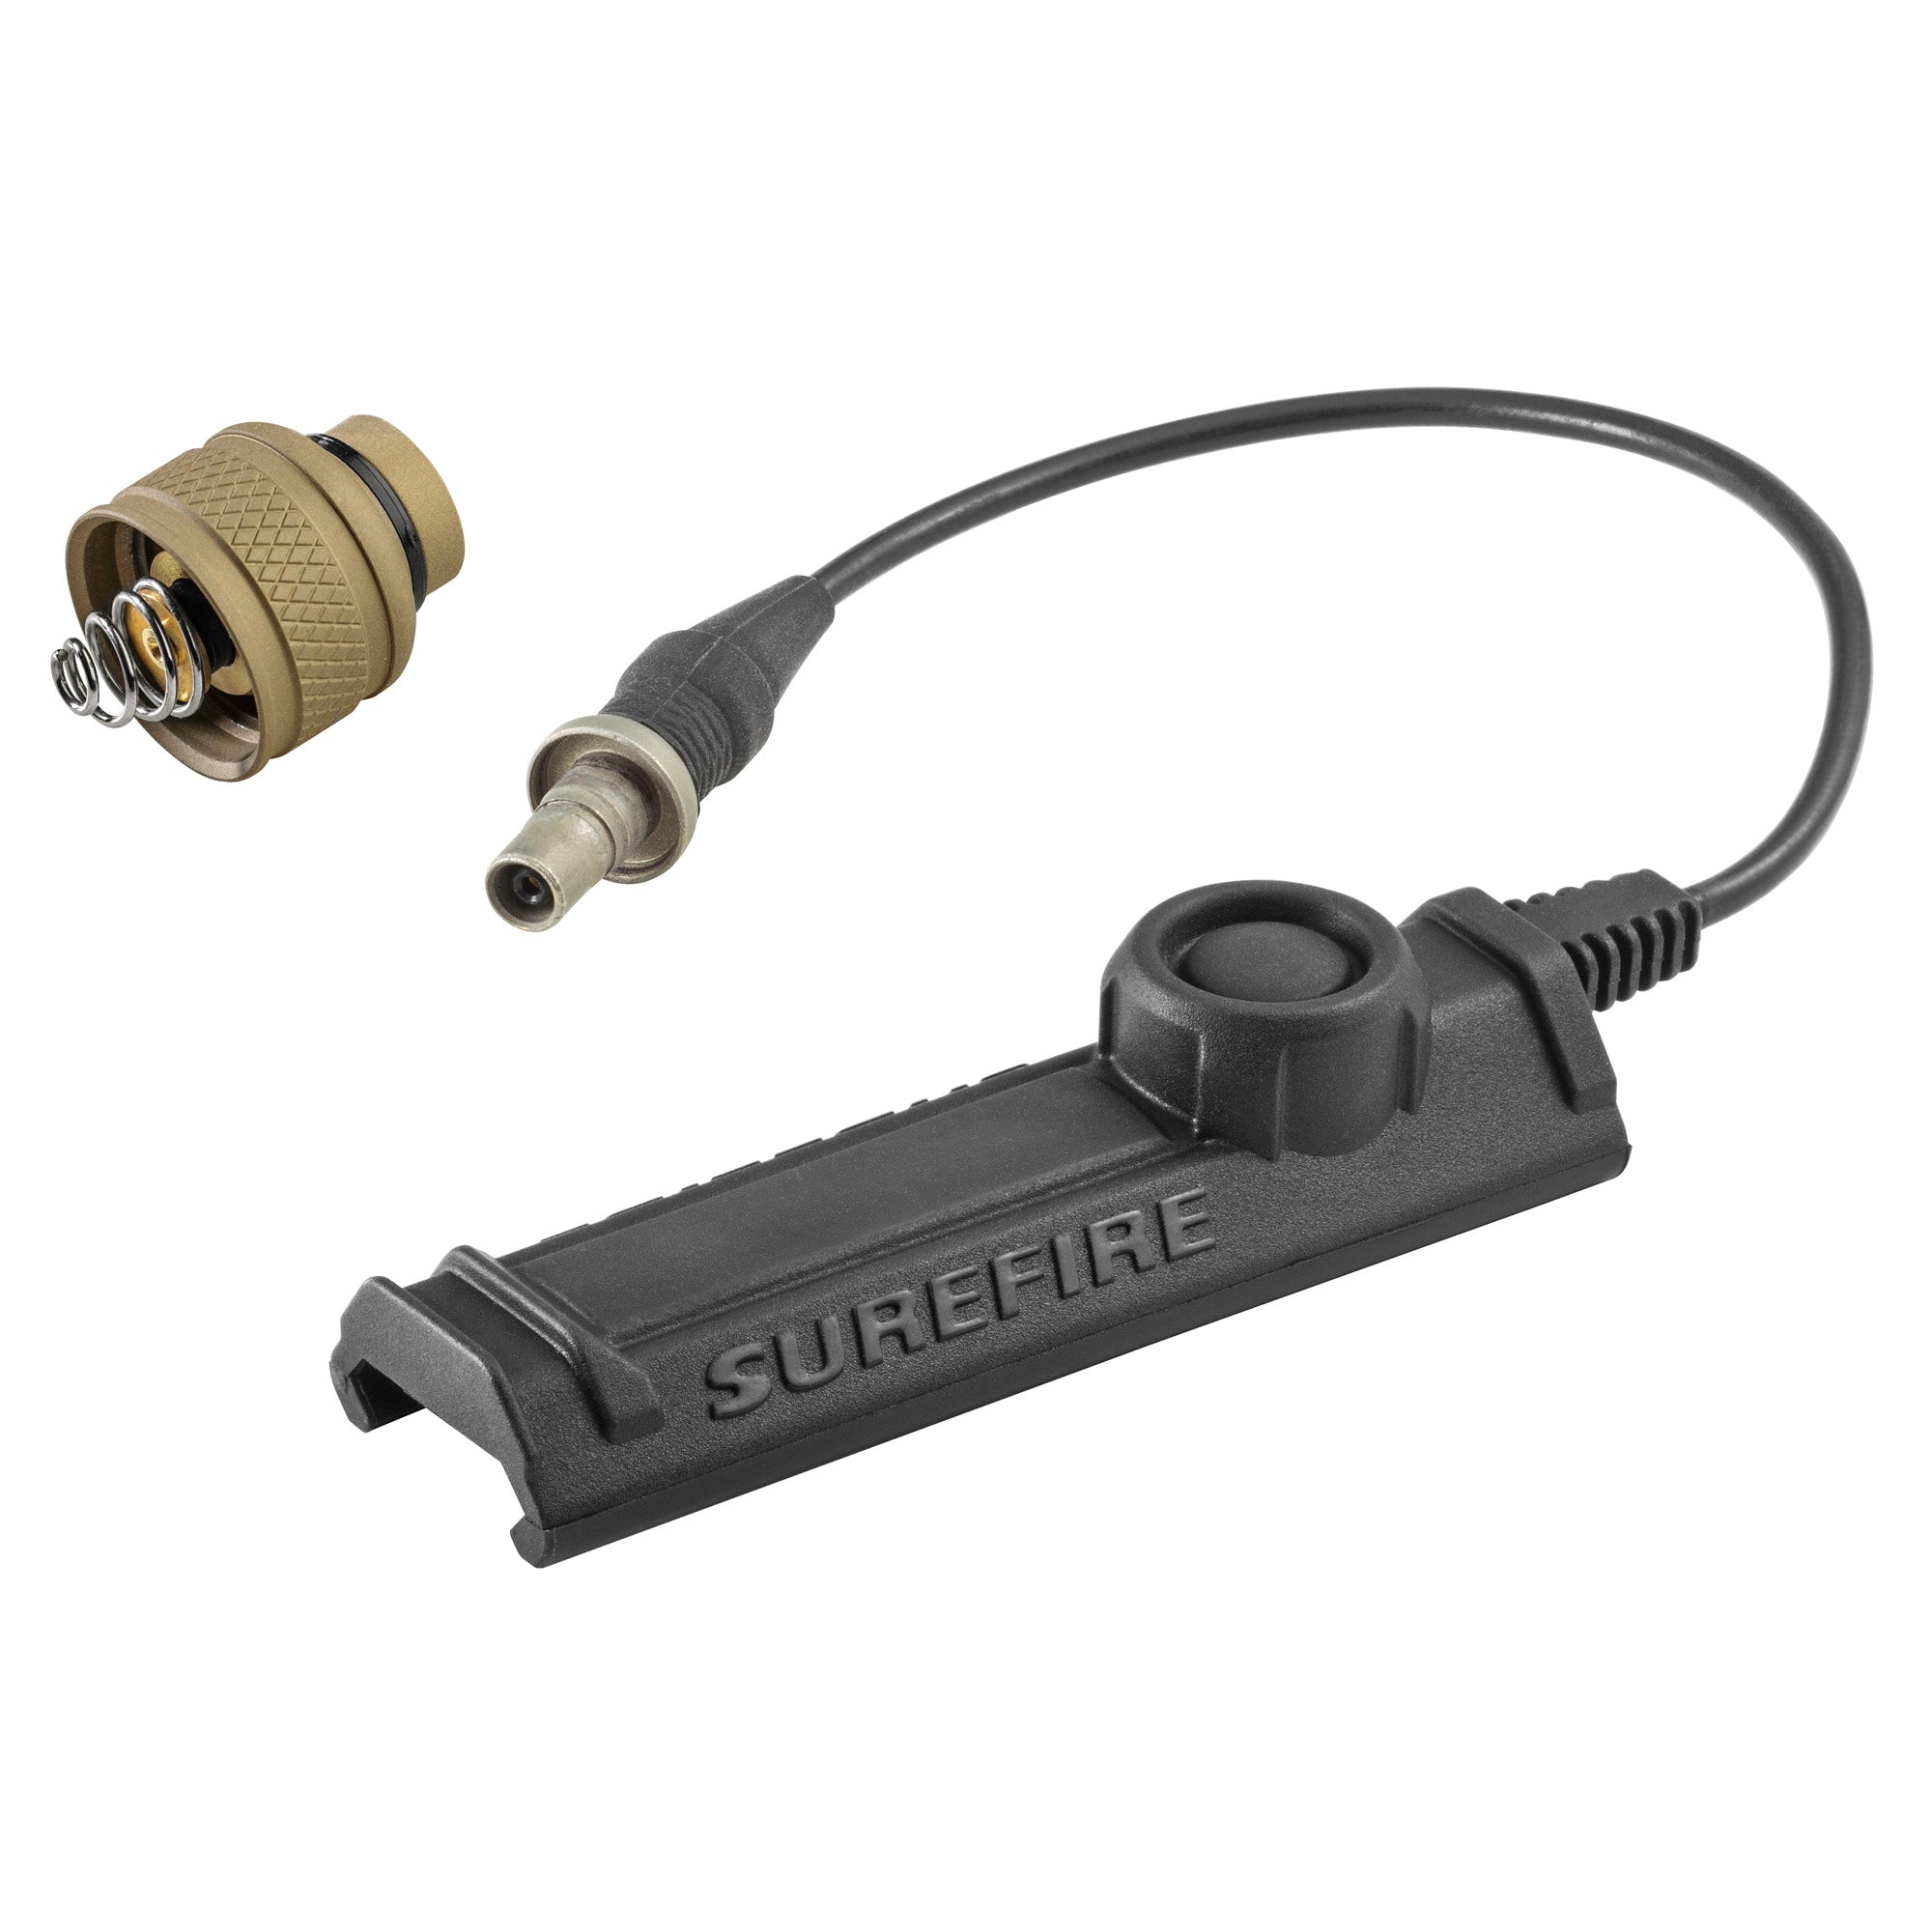 Surefire Replacement Tan Rear Cap Assembly for Scoutlight Series, Includes SR07 Rail Tape Switch